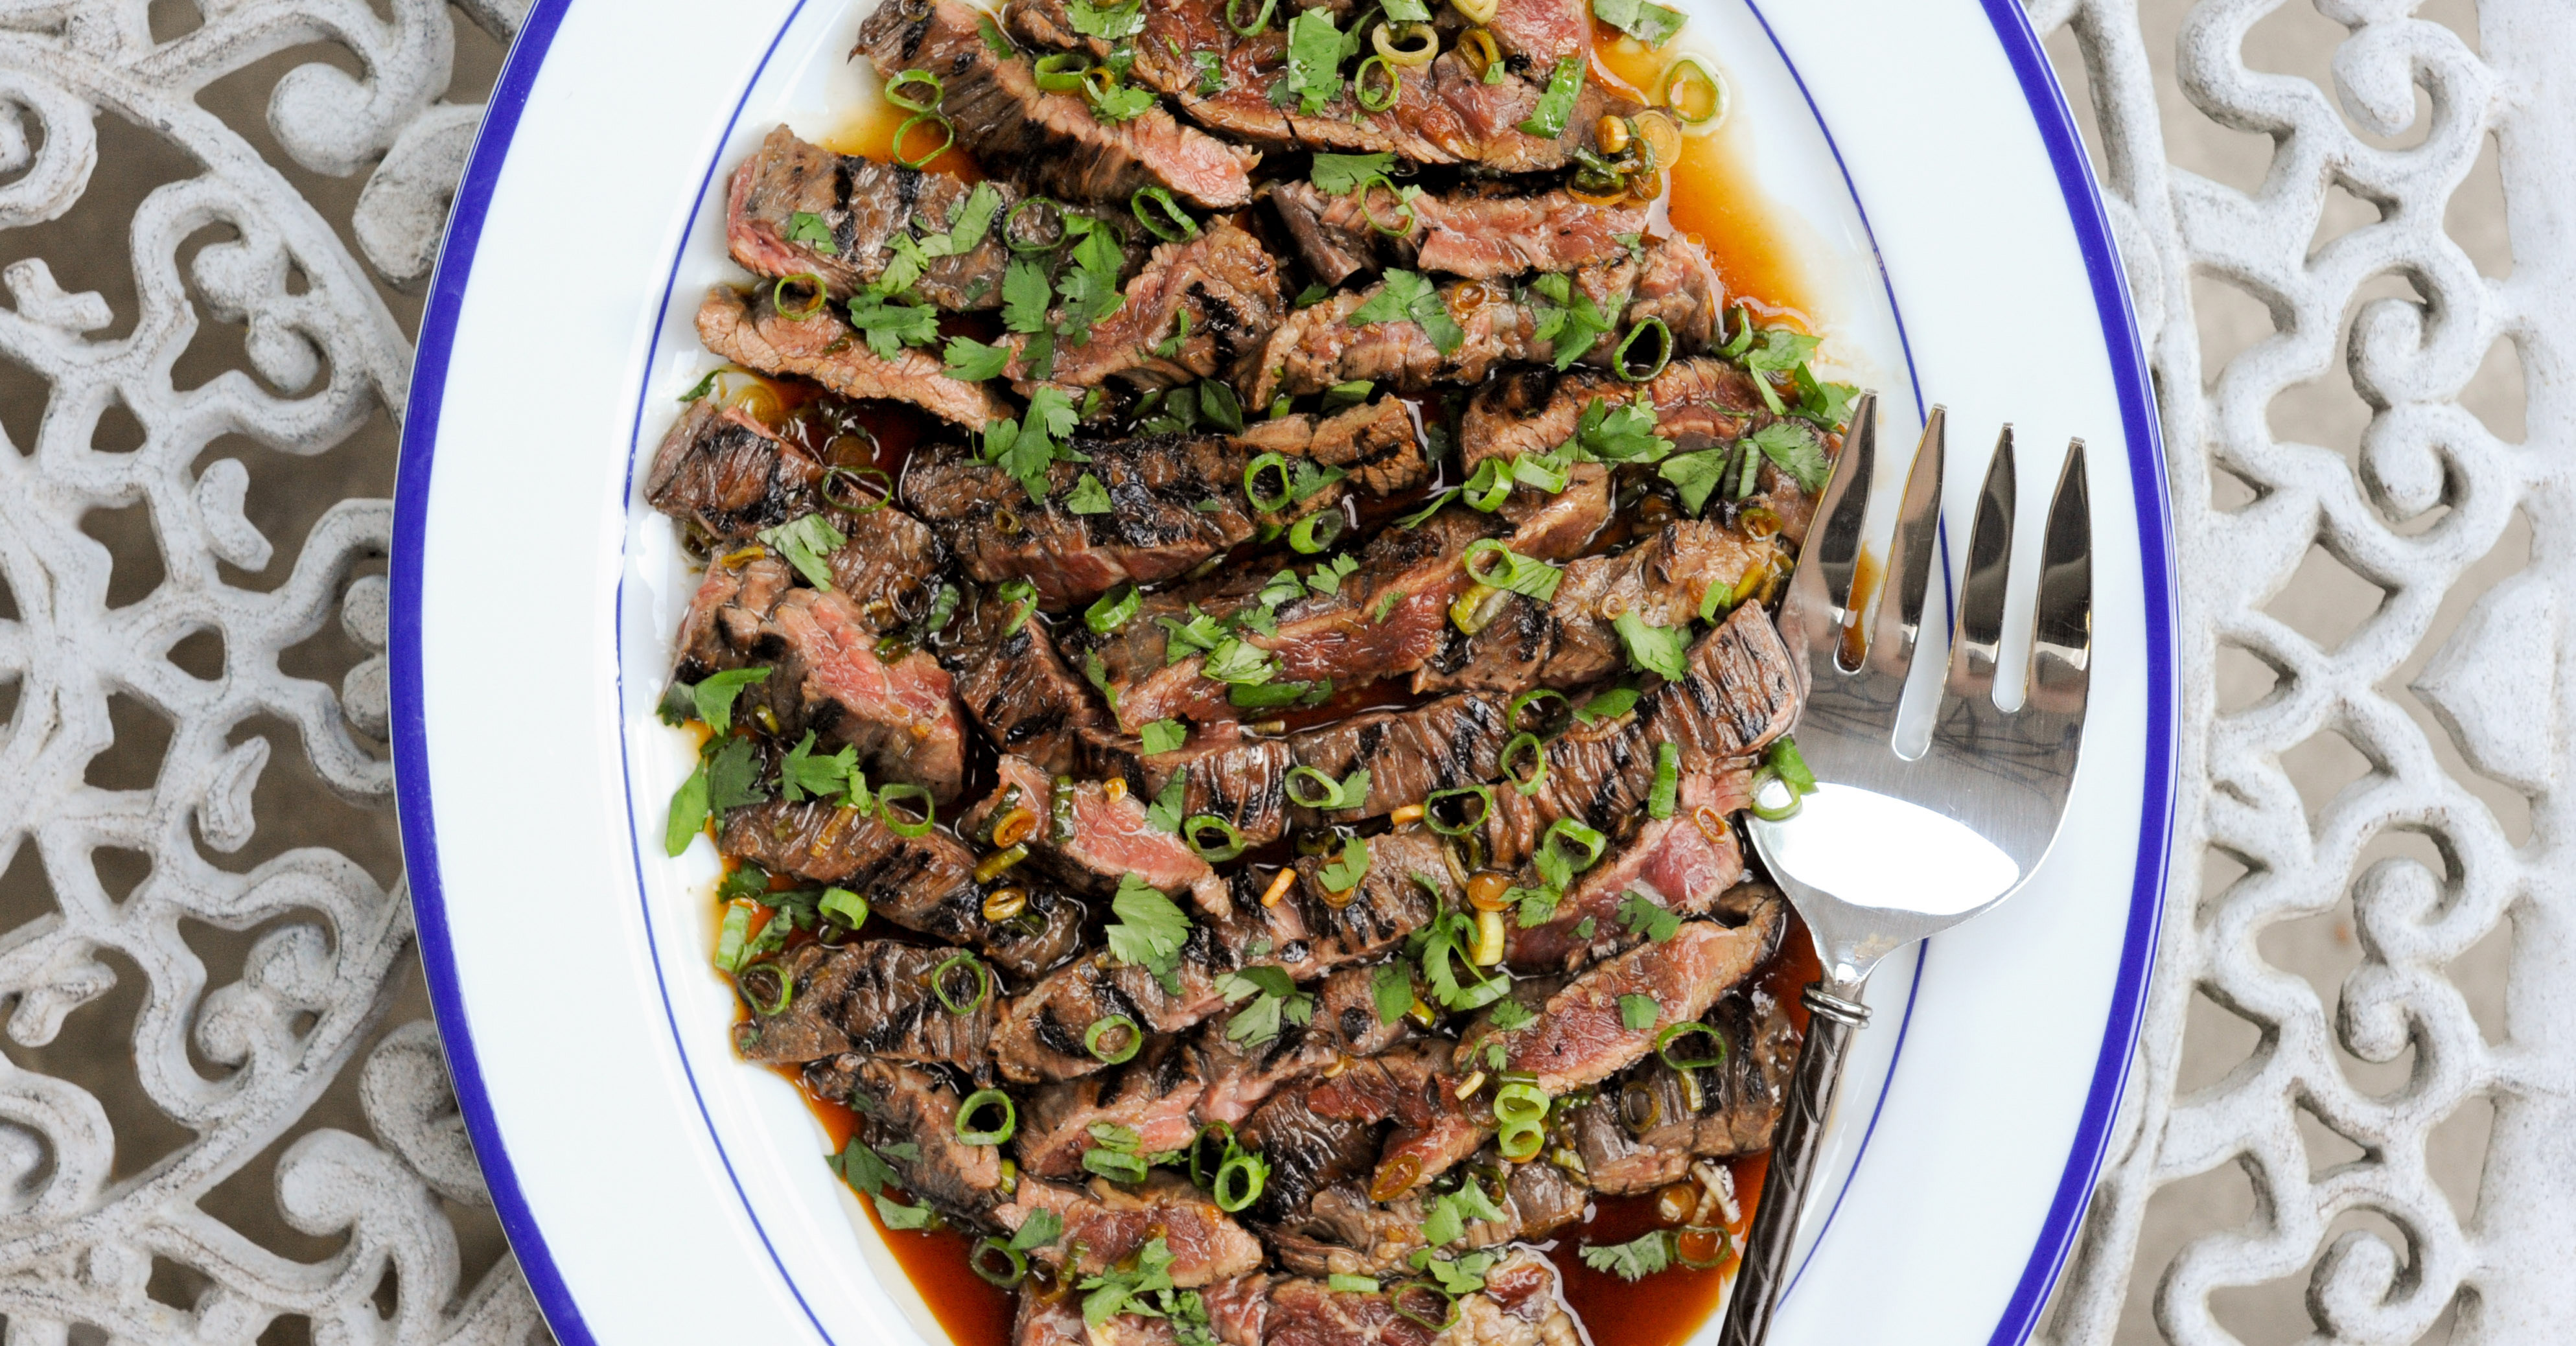 Grilled Skirt Steak With Soy-Garlic Marinade